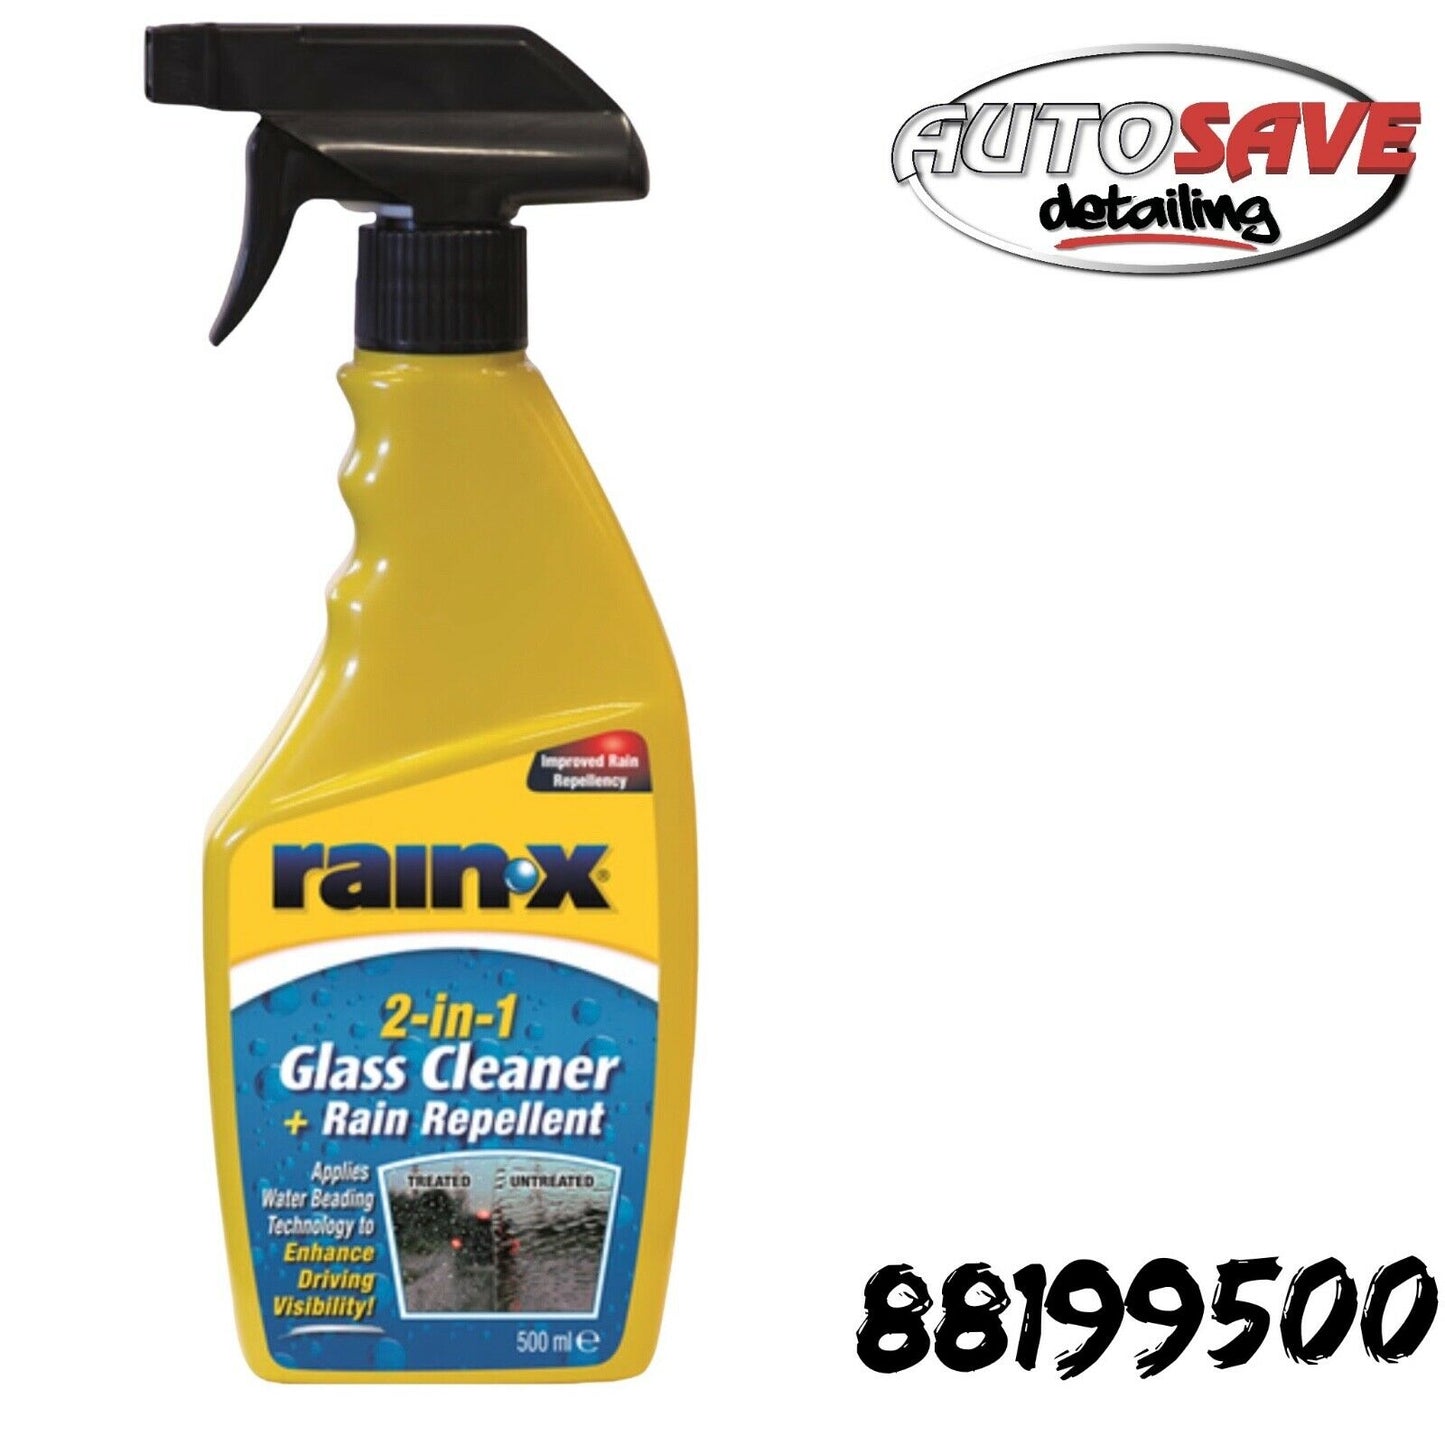 Rain X 2in1 Glass Cleaner and Rain Repellent 500ml Trigger Spray